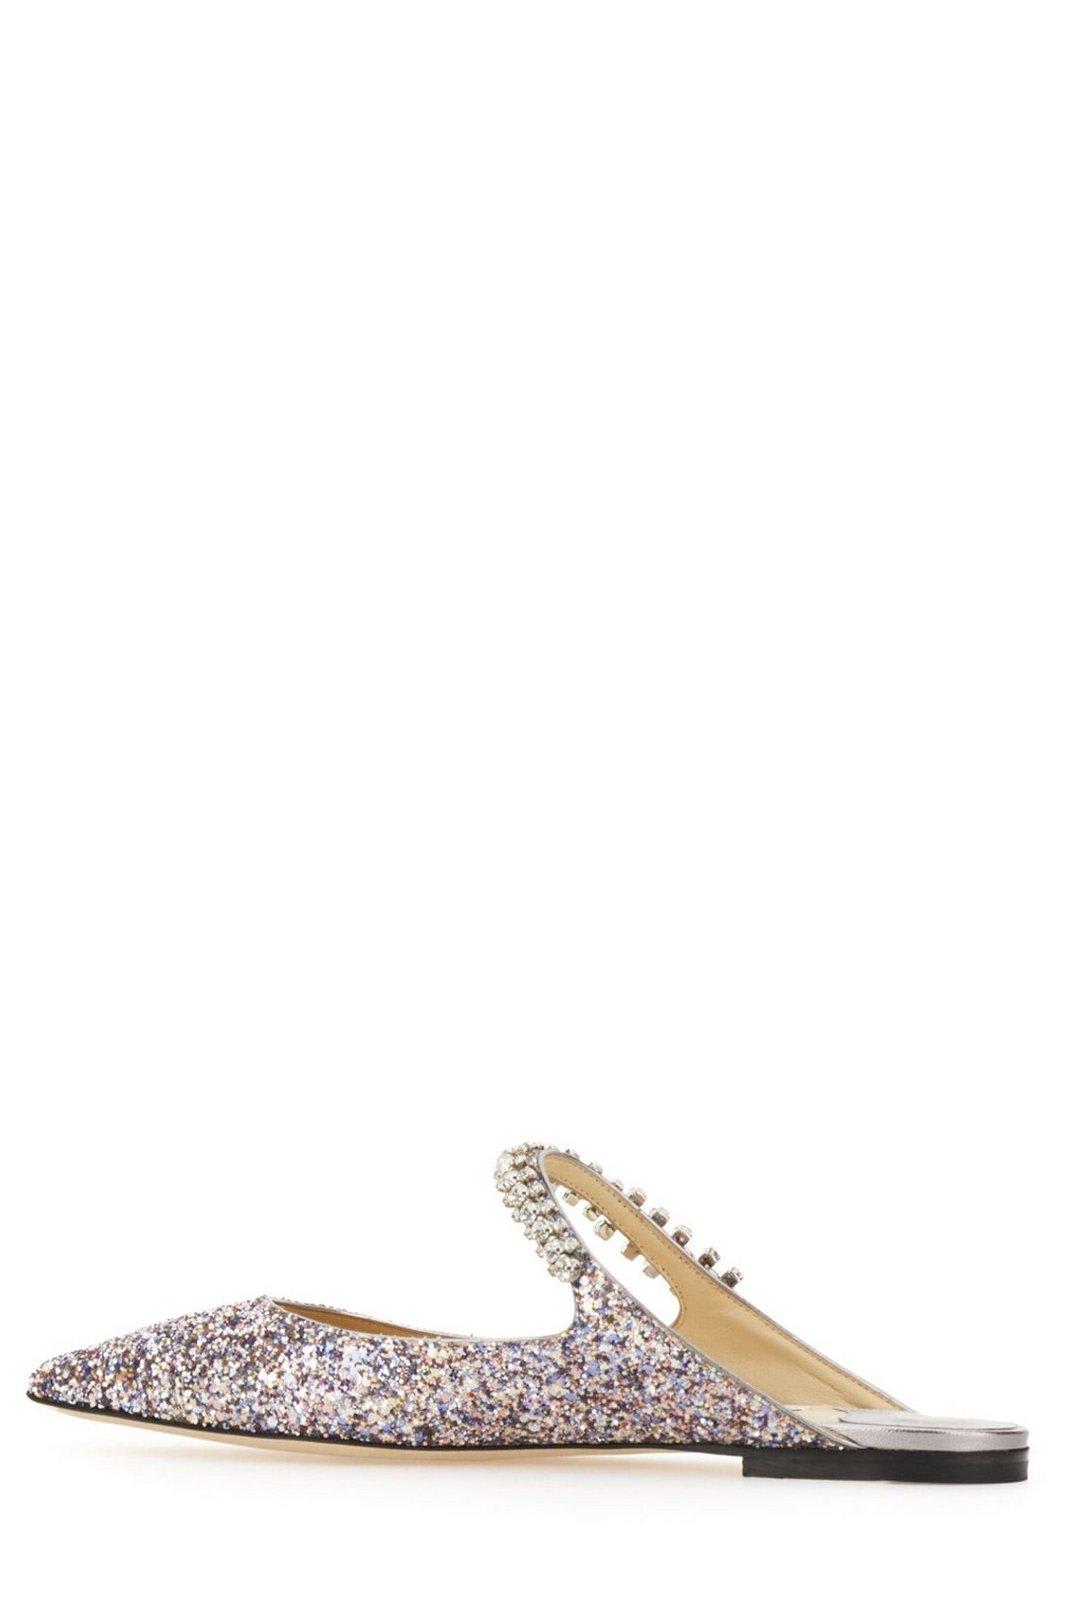 Shop Jimmy Choo Bing Embellished Pointed Toe Ballerina Shoes In Silver